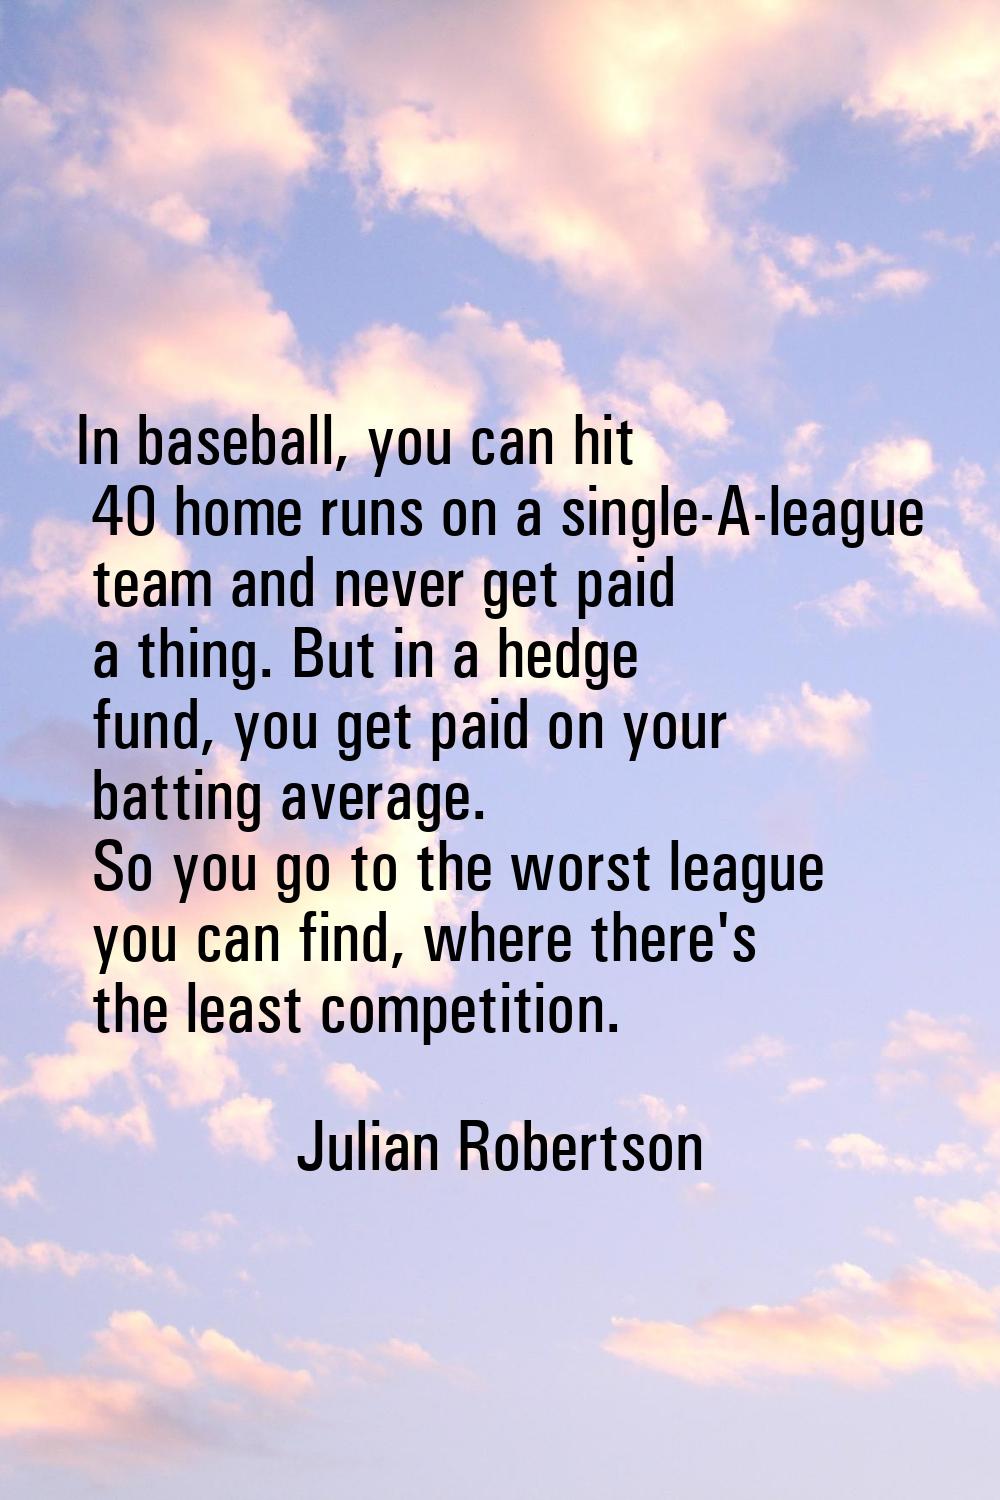 In baseball, you can hit 40 home runs on a single-A-league team and never get paid a thing. But in 